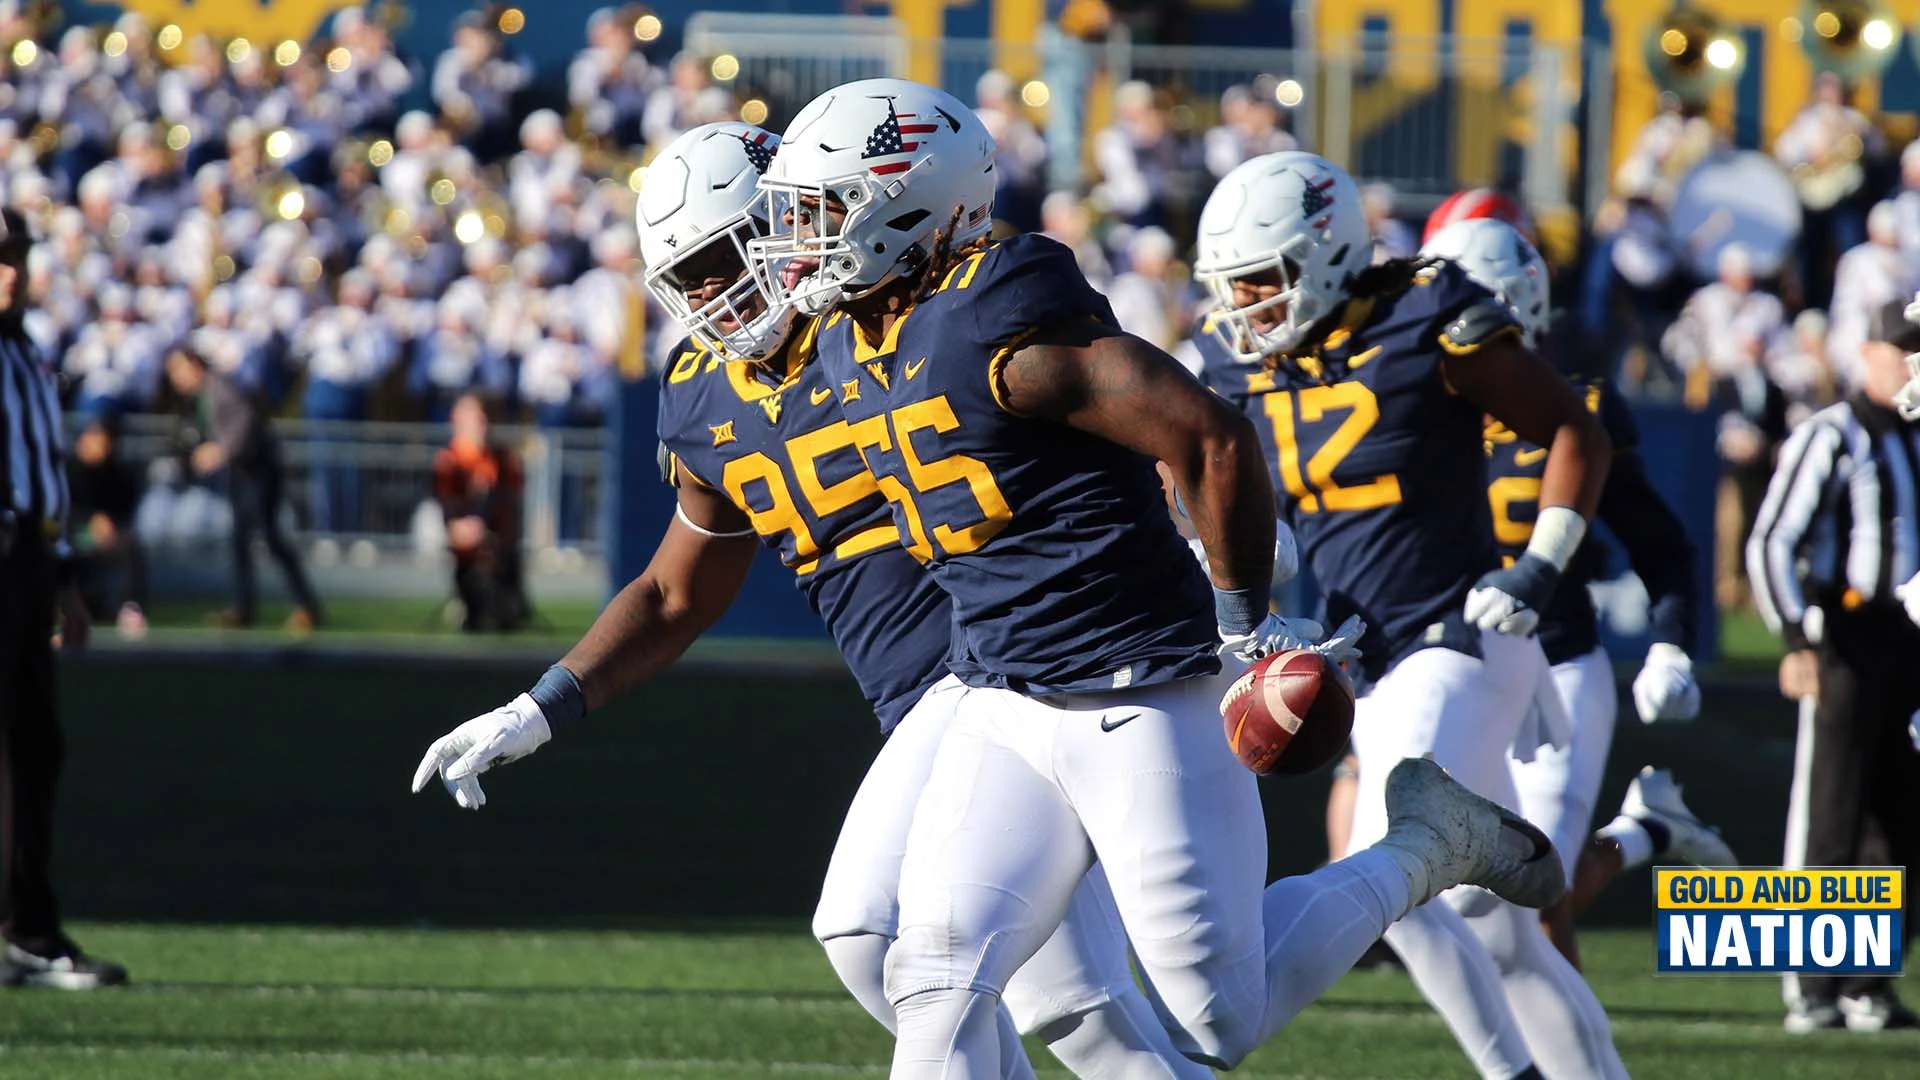 1920x1080 Bowl eligibility still in play for WVU football with three games remaining